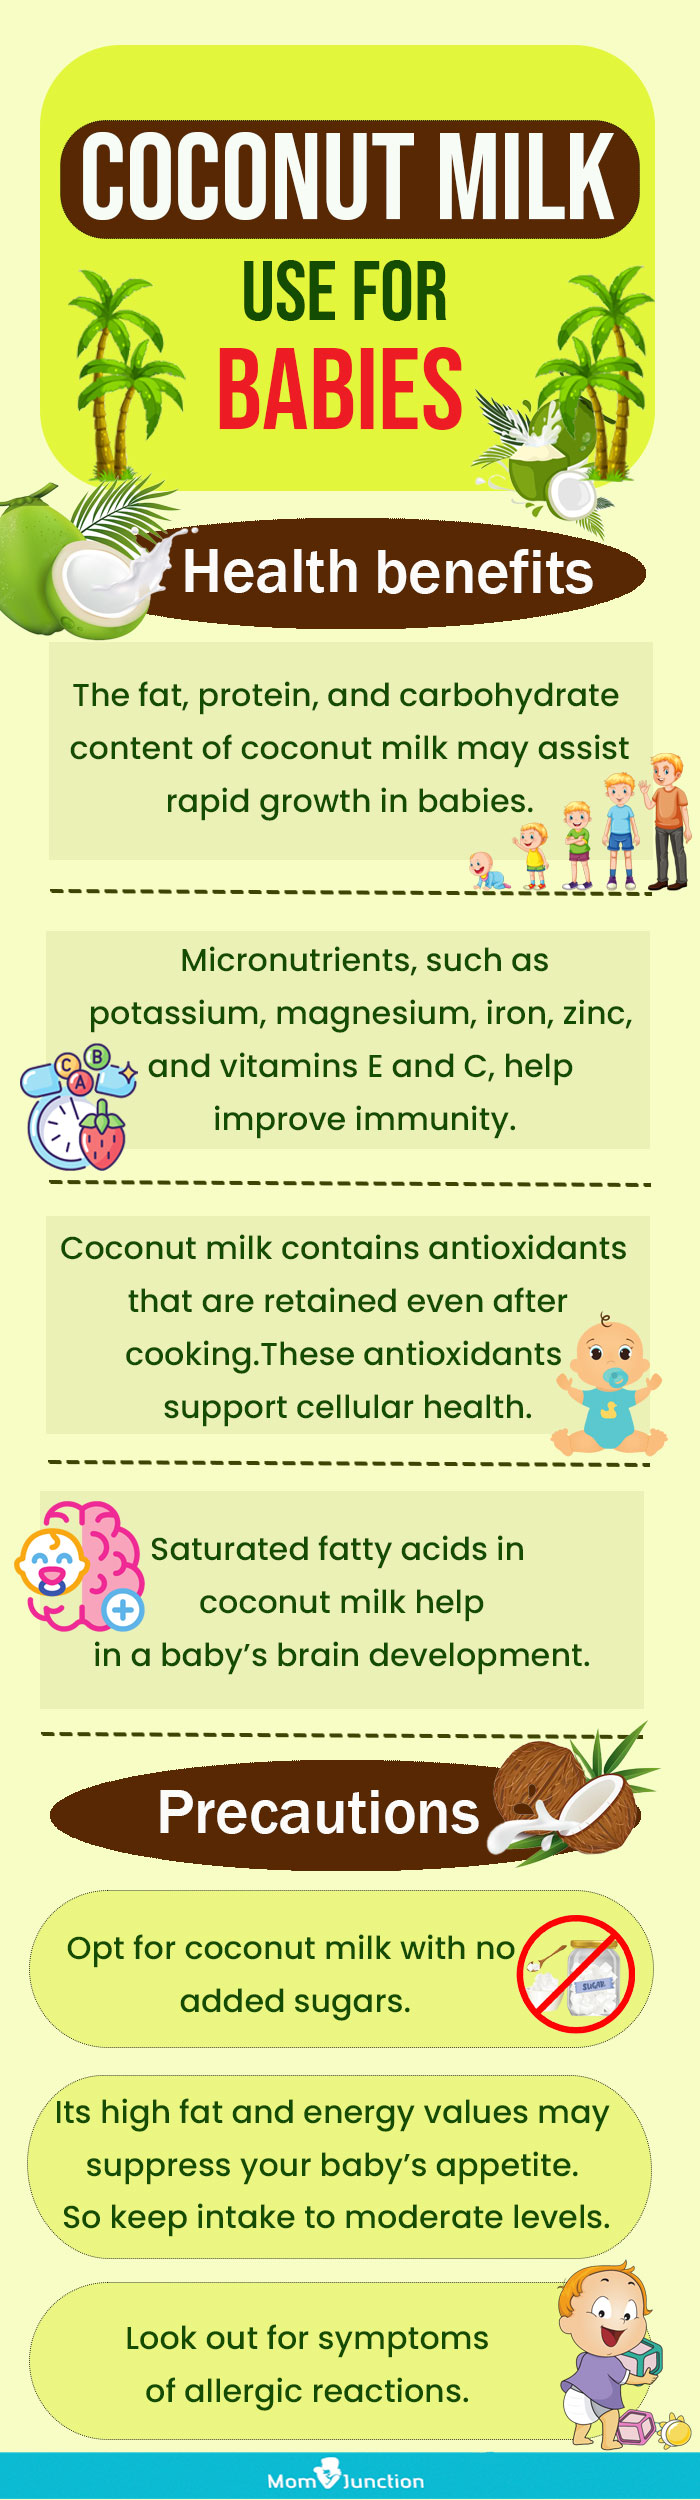 coconut milk use for babies (infographic)